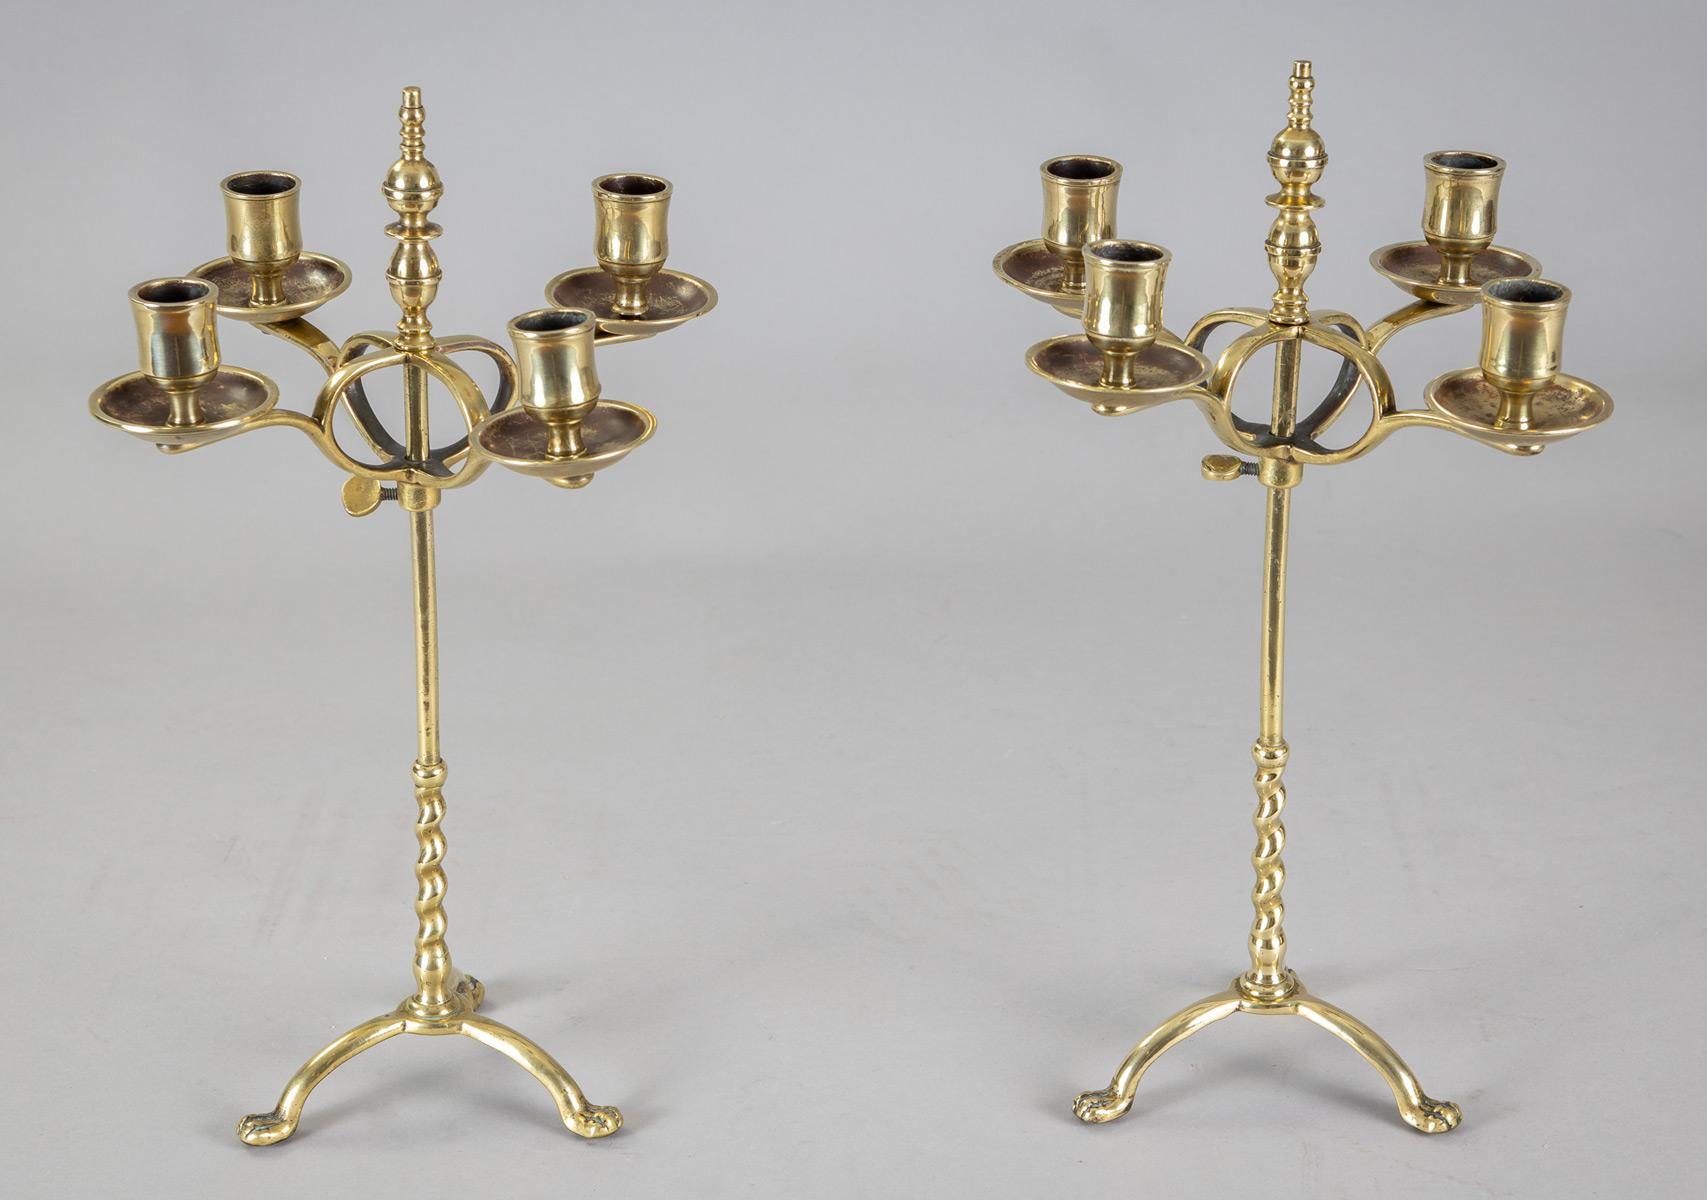 Antique pair of English brass four-light adjustable candelabra, the central stem on a barley twist column, turned brass finial, wing nut to raise, lower and tighten the cluster, mounted on tripod base ending in paw feet.